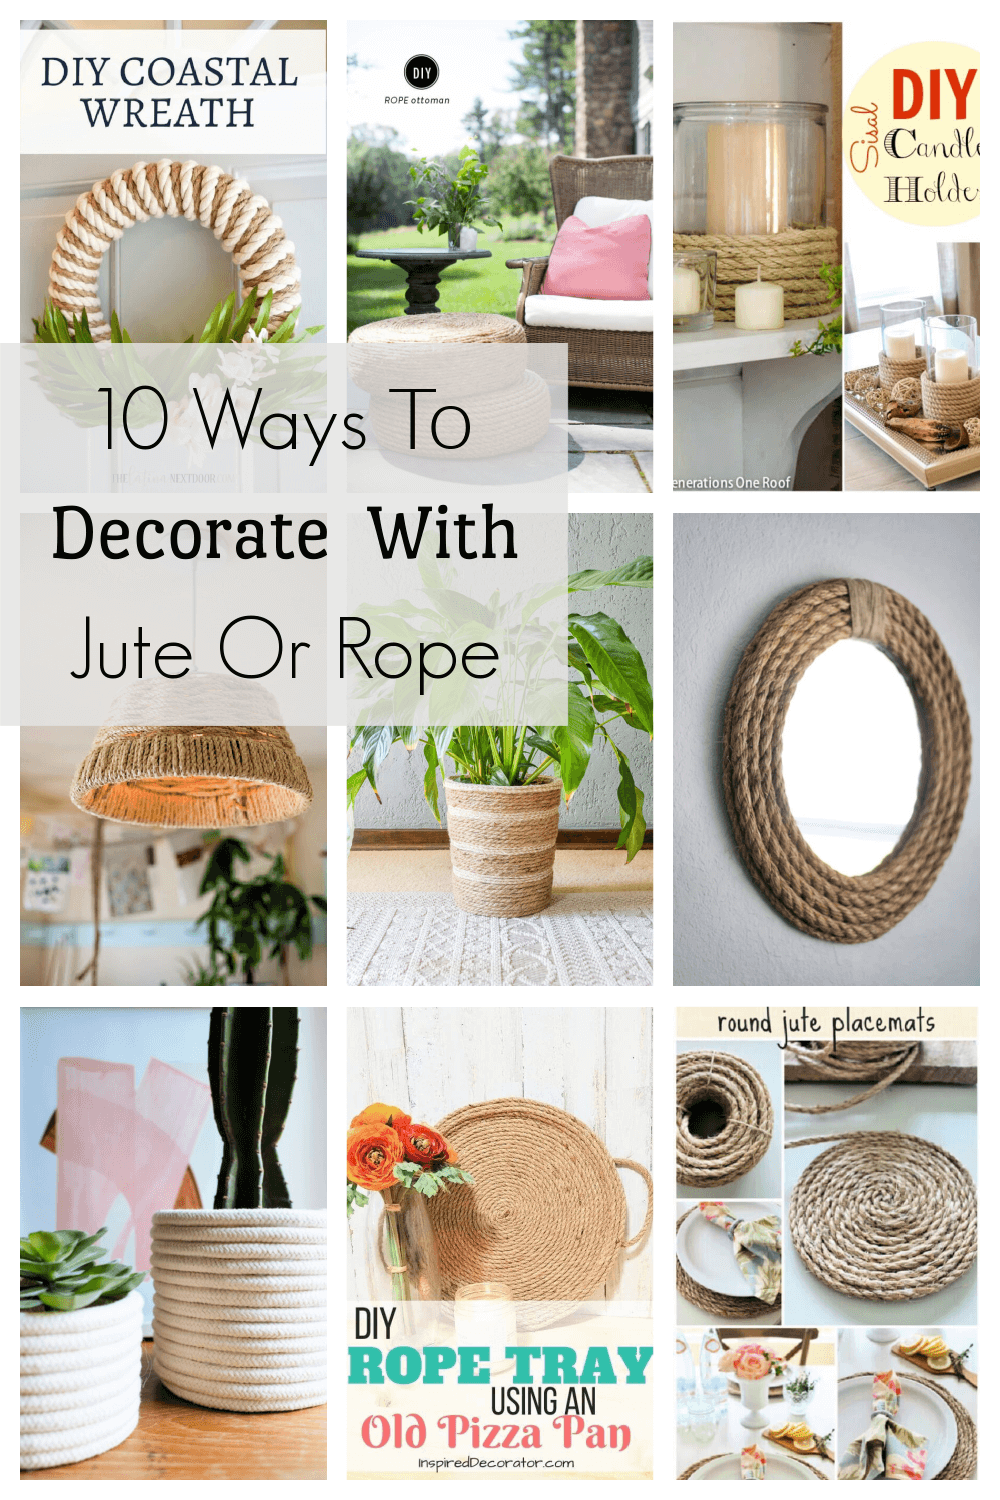 In 10 Ways To Decorate With Jute Or Rope, there are all kinds of things you can wrap with jute or rope.